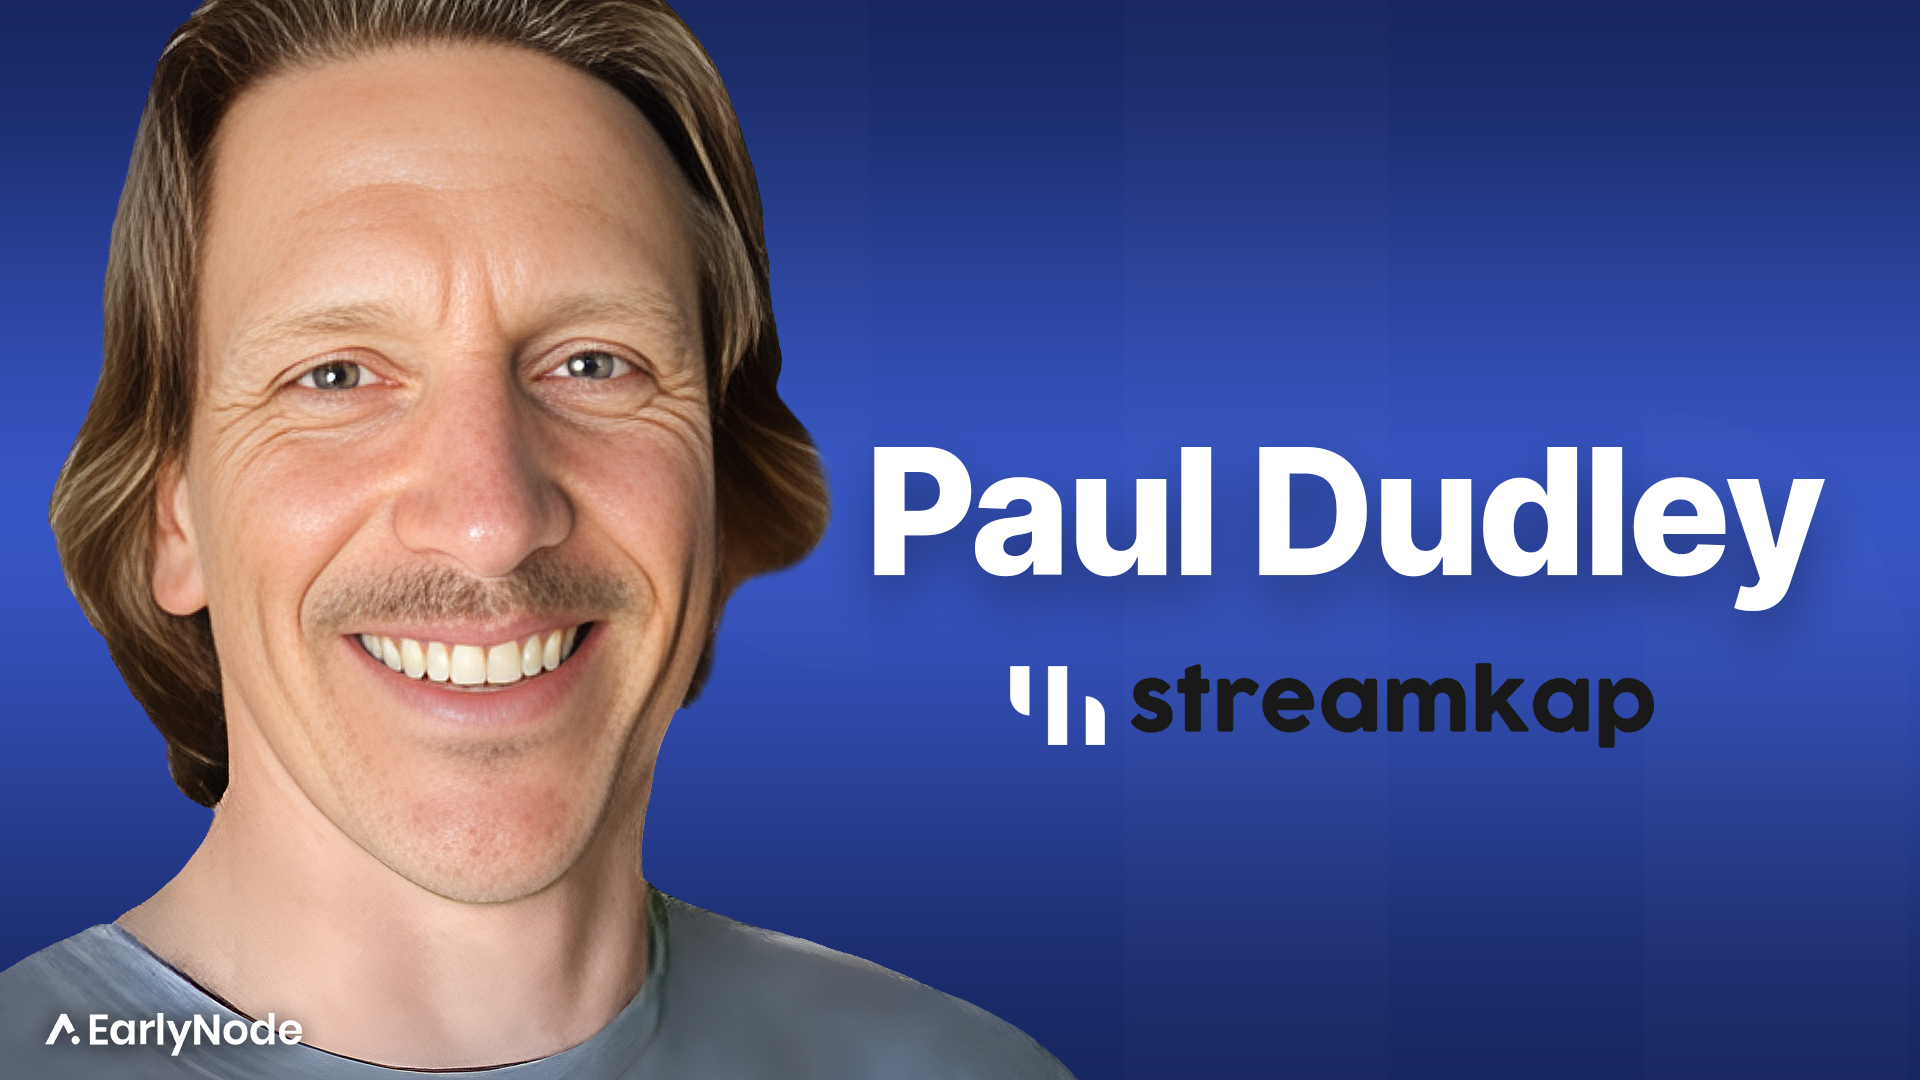 Building a SaaS startup as a sales expert with Paul Dudley, founder of StreamKap